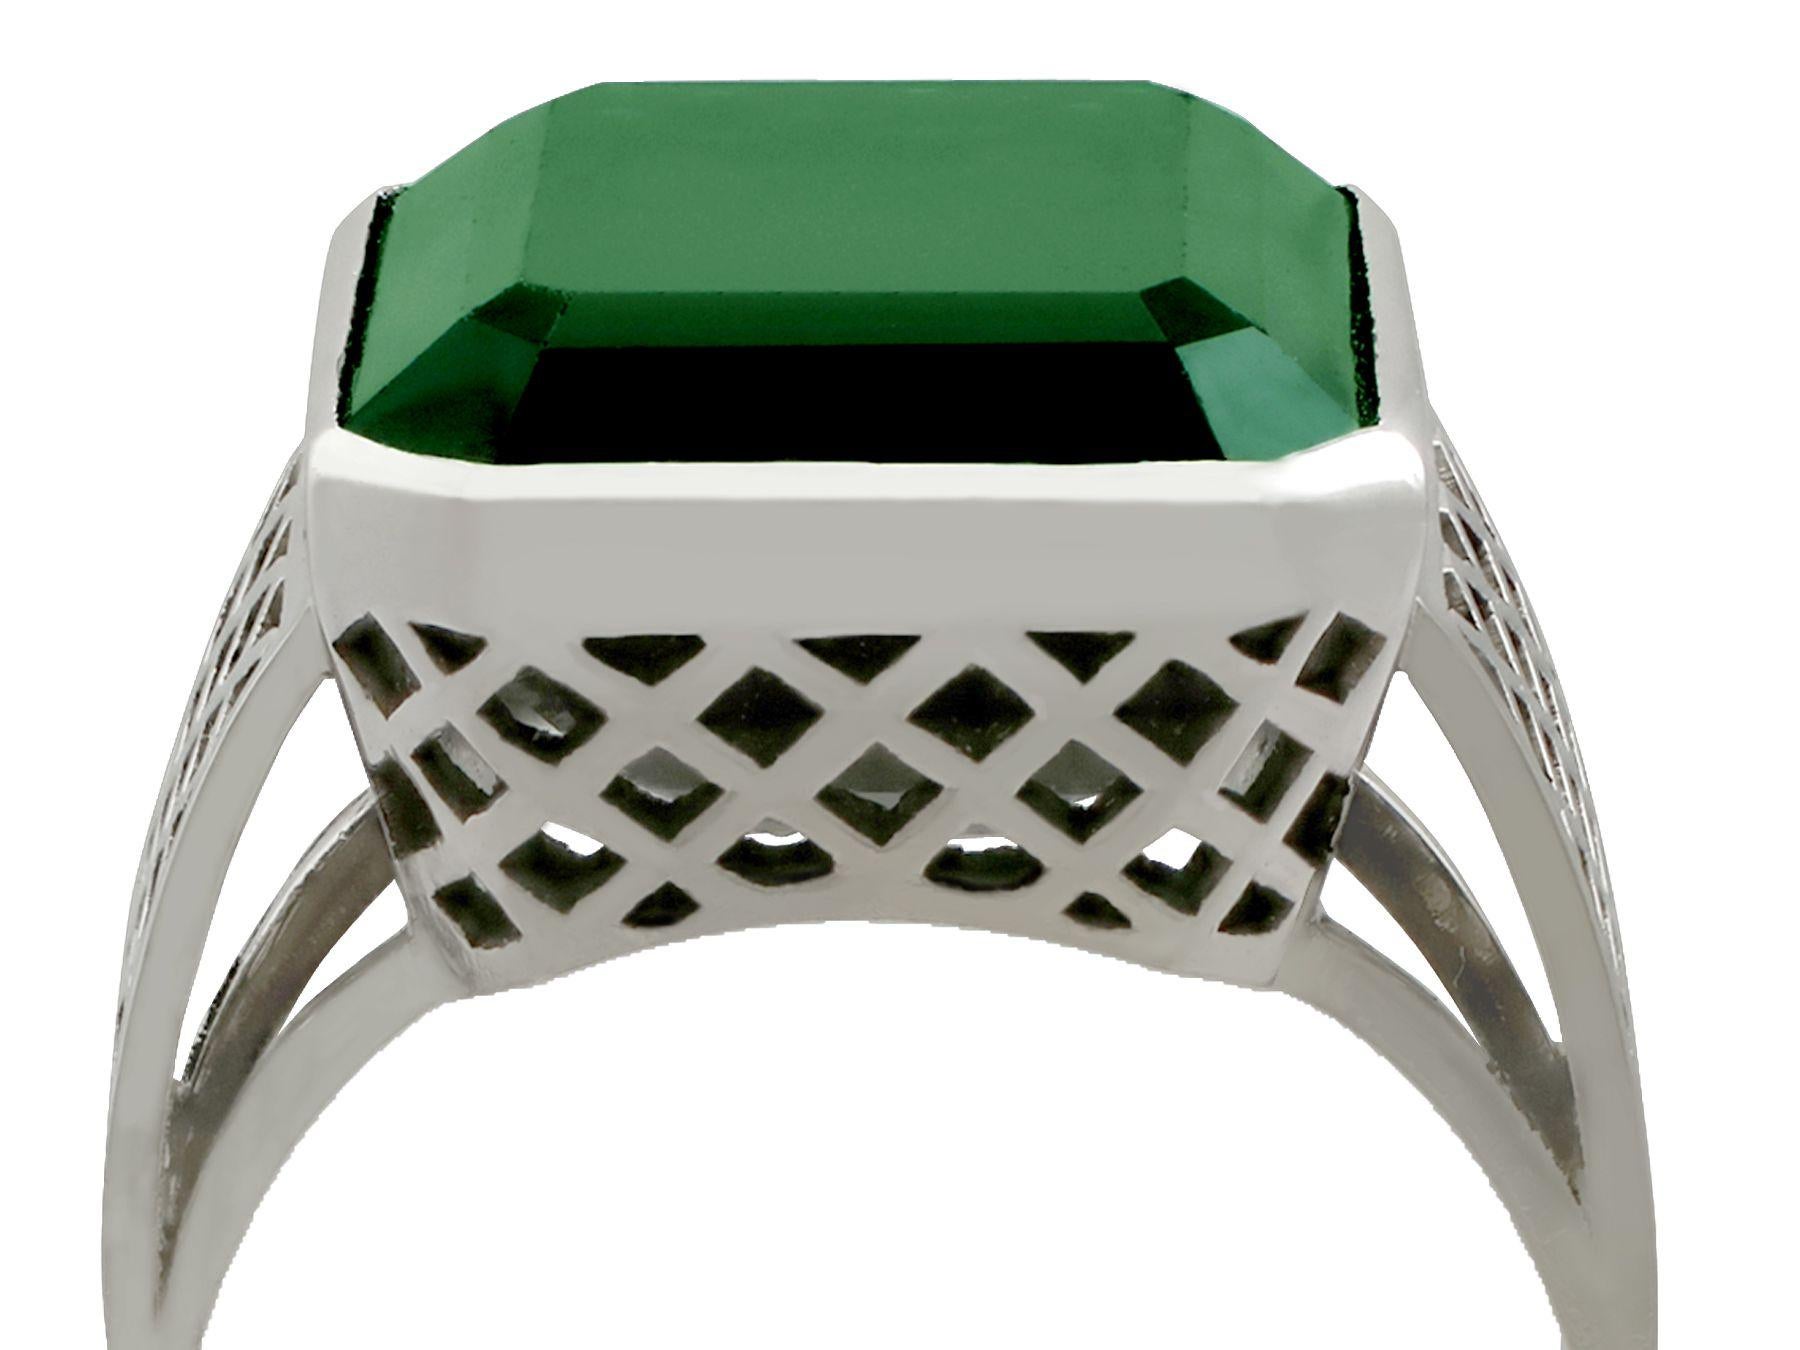 A stunning, fine and impressive vintage 10.94 carat green tourmaline and 18 karat white gold cocktail ring; part of our diverse vintage jewelry and estate jewelry collections

This stunning, fine and impressive vintage tourmaline dress ring has been